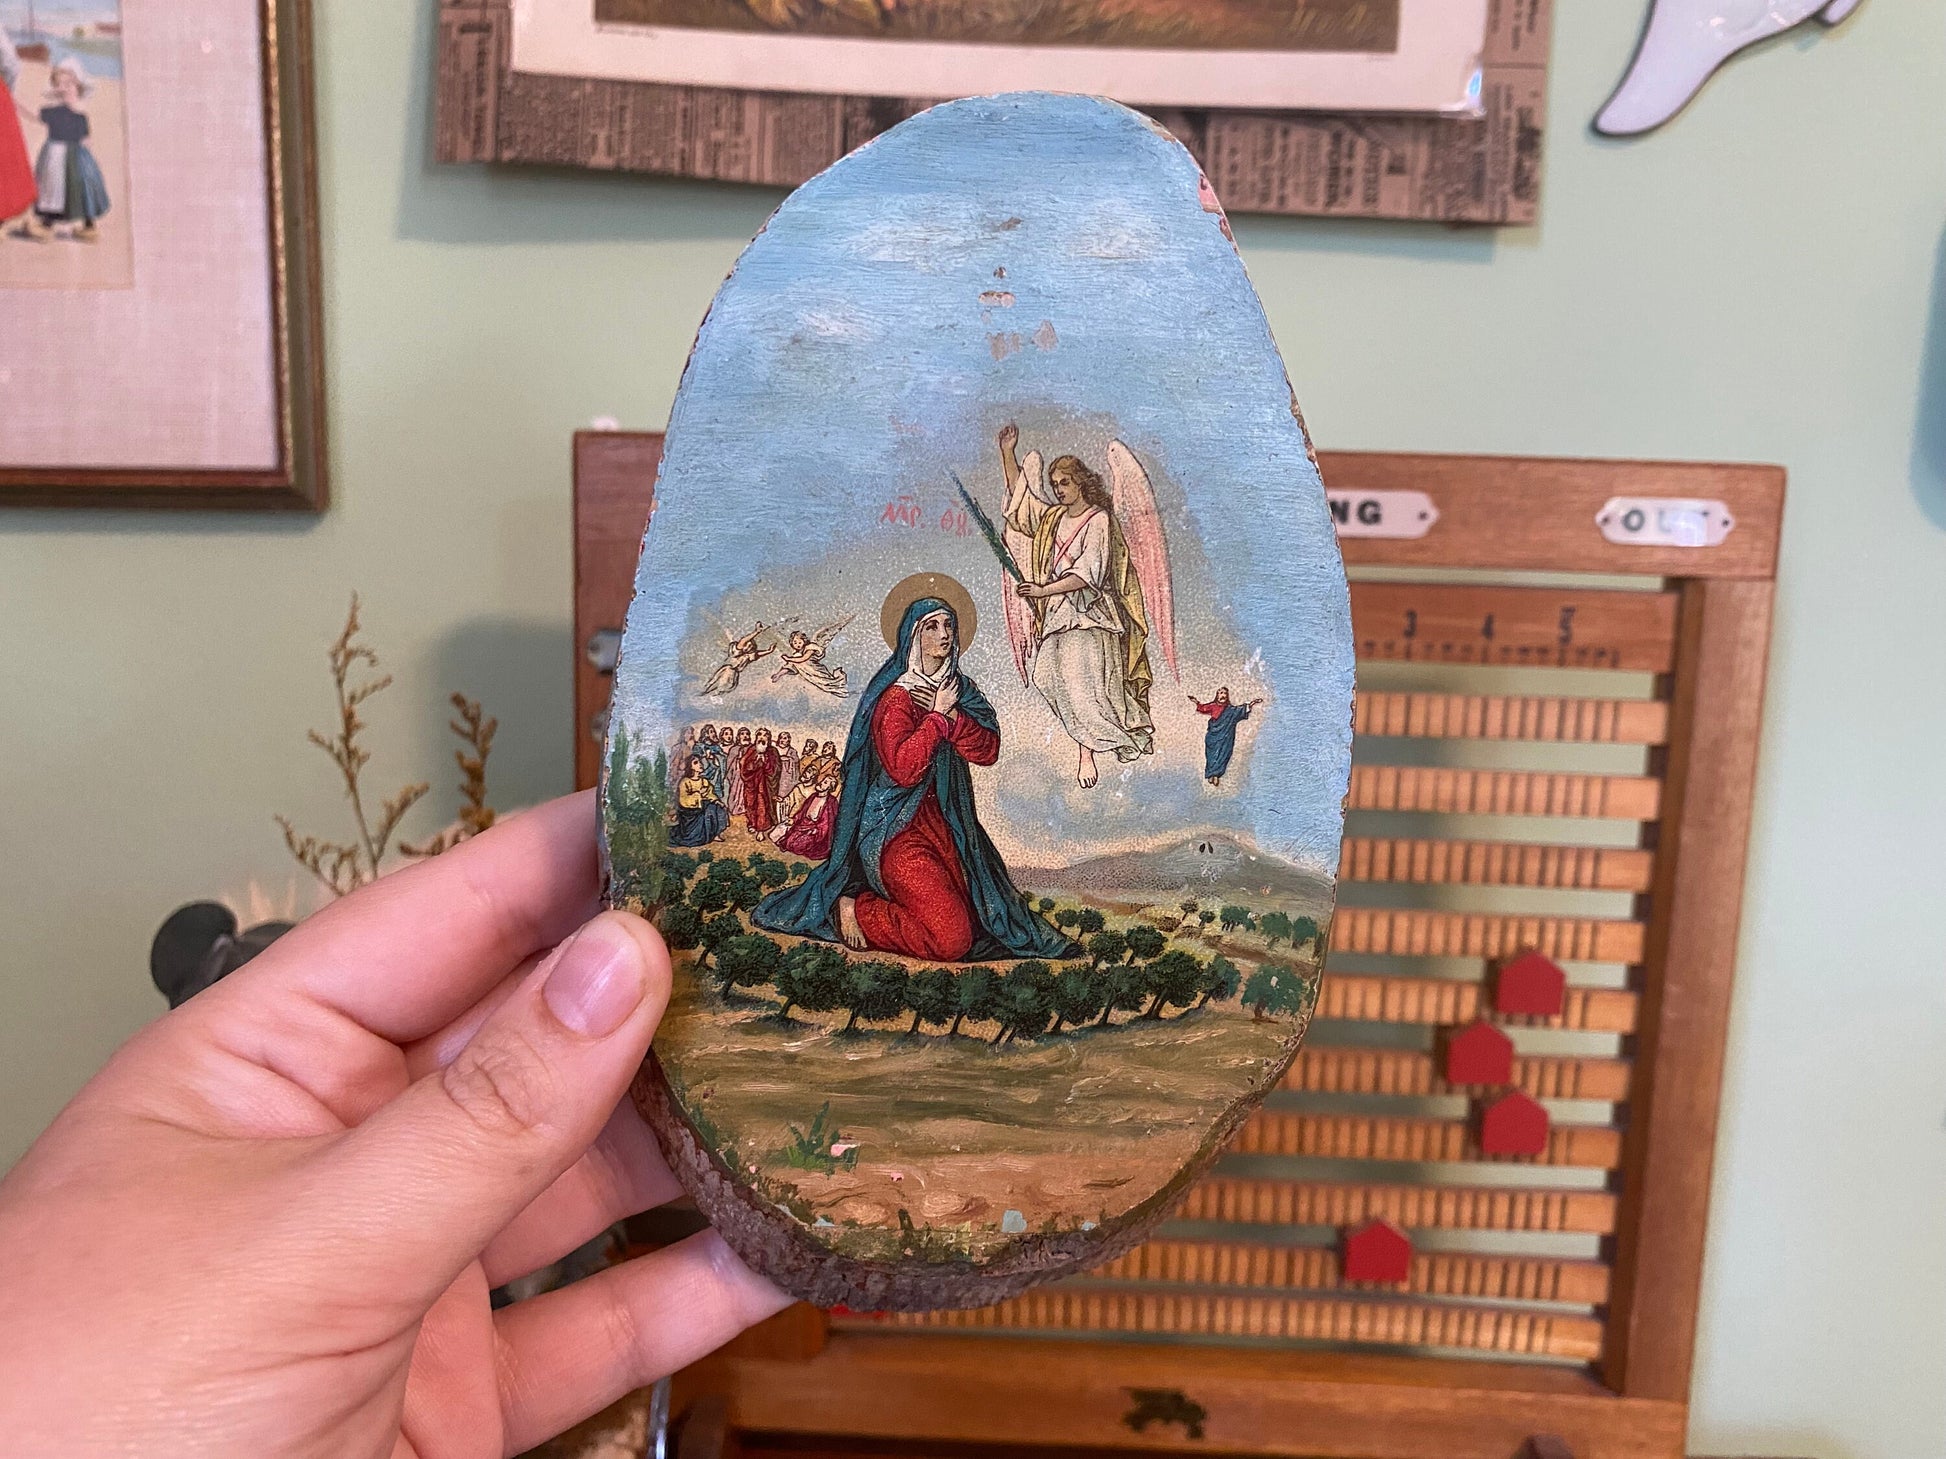 Vintage religious wood slice art with depiction of the Virgin Mary and the Ascension of Jesus on real rustic wood. Catholic home decor.